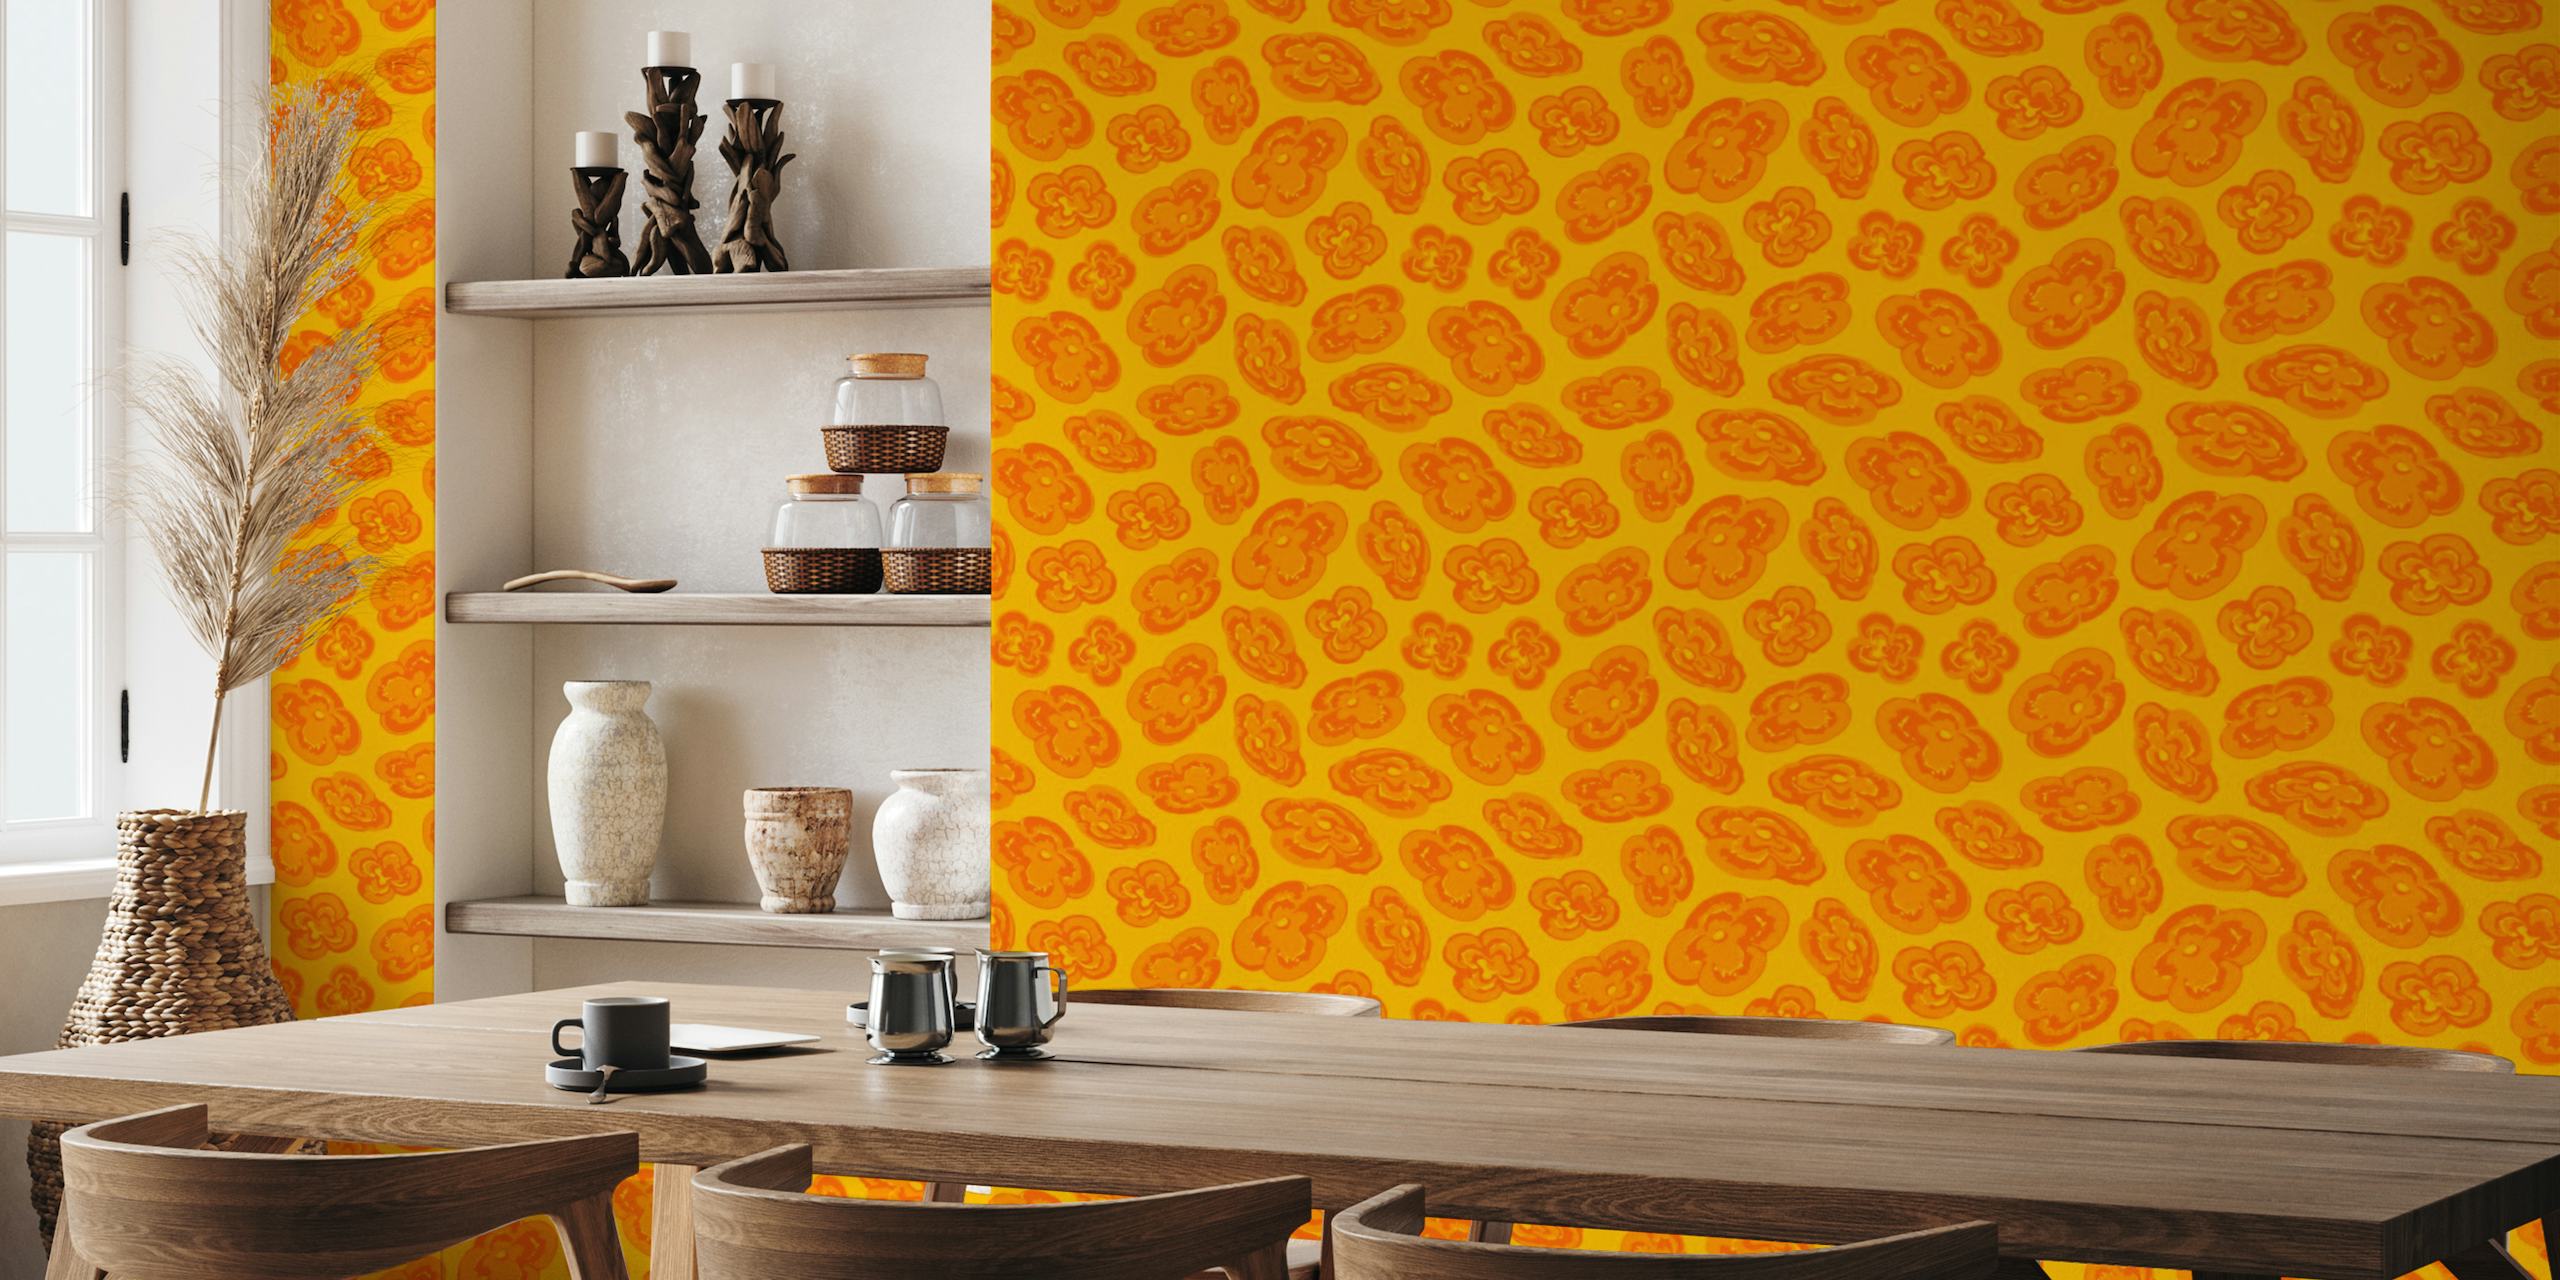 Abstract yellow wall mural with orange lily patterns for home decor